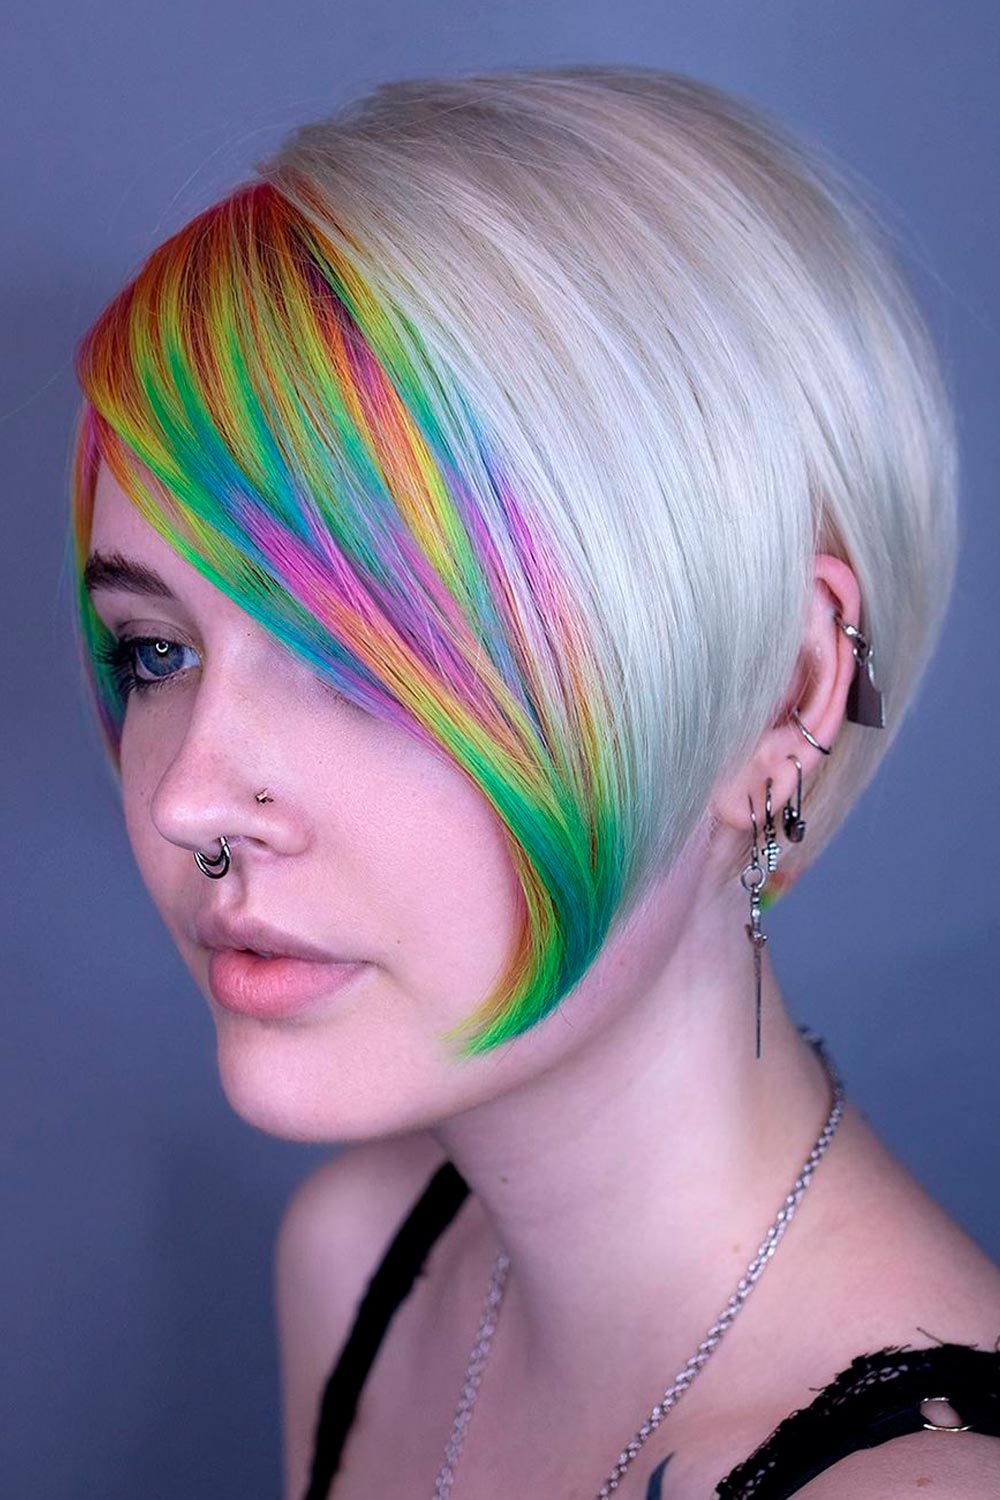 If you love to be unique and adventurous, you can go for dyed bangs